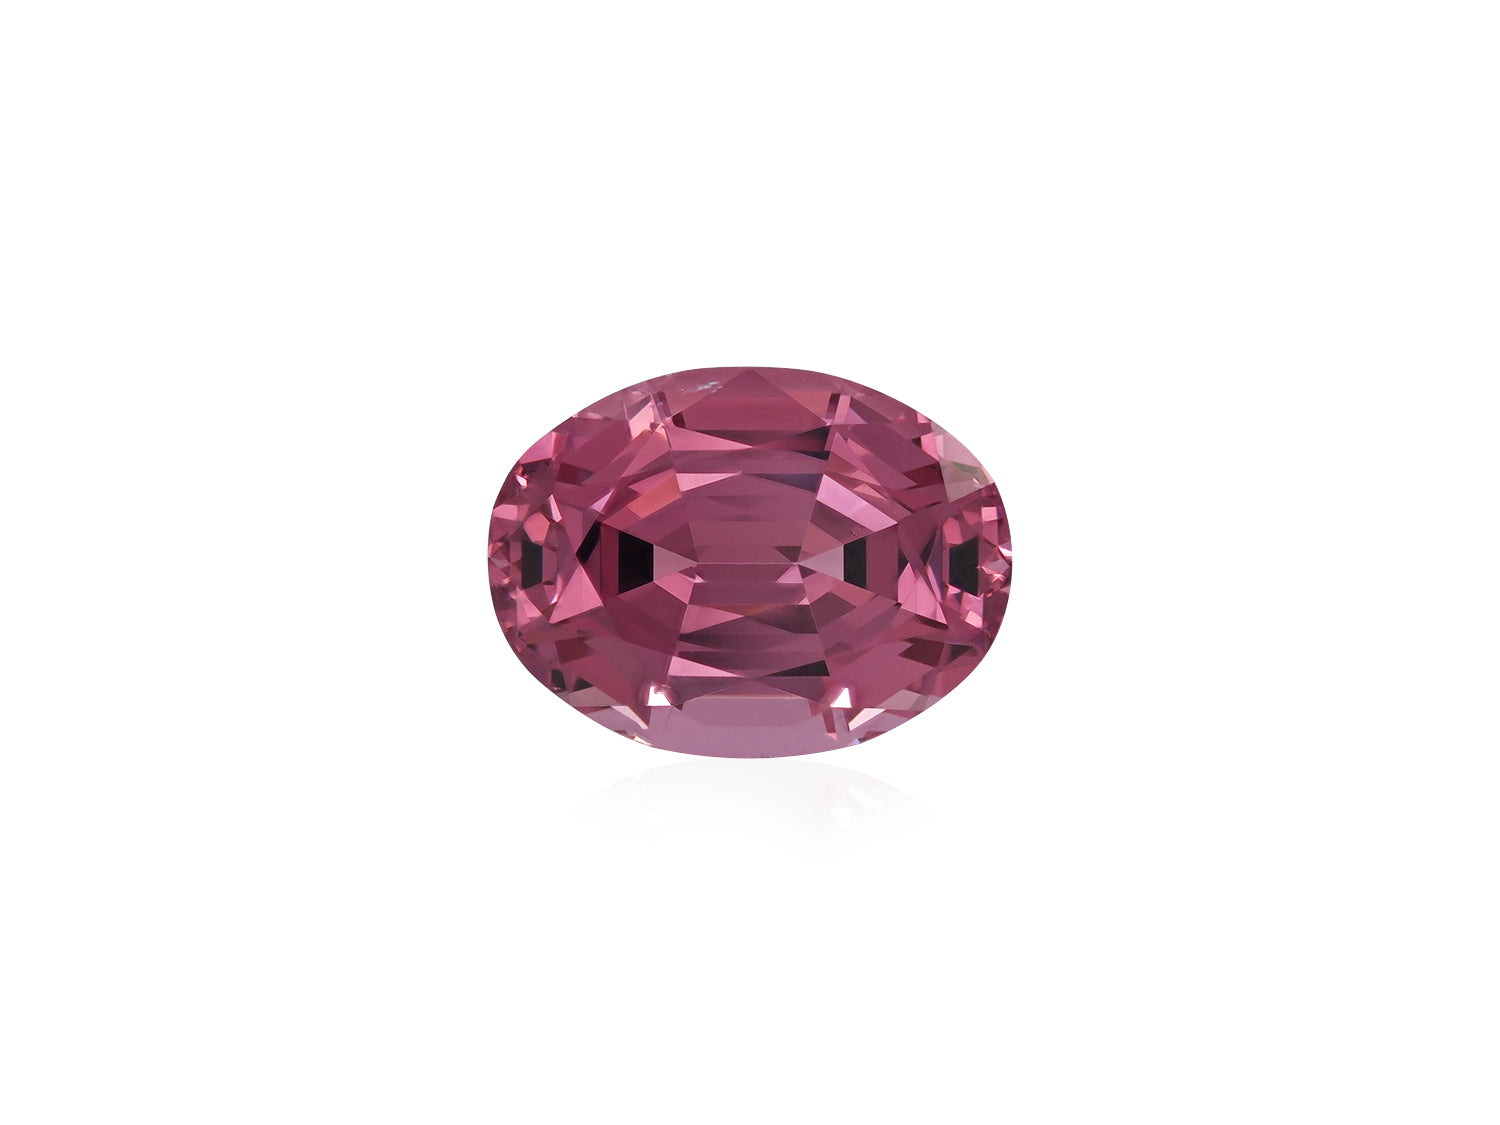 Baby Pink Spinel 6.37 CT